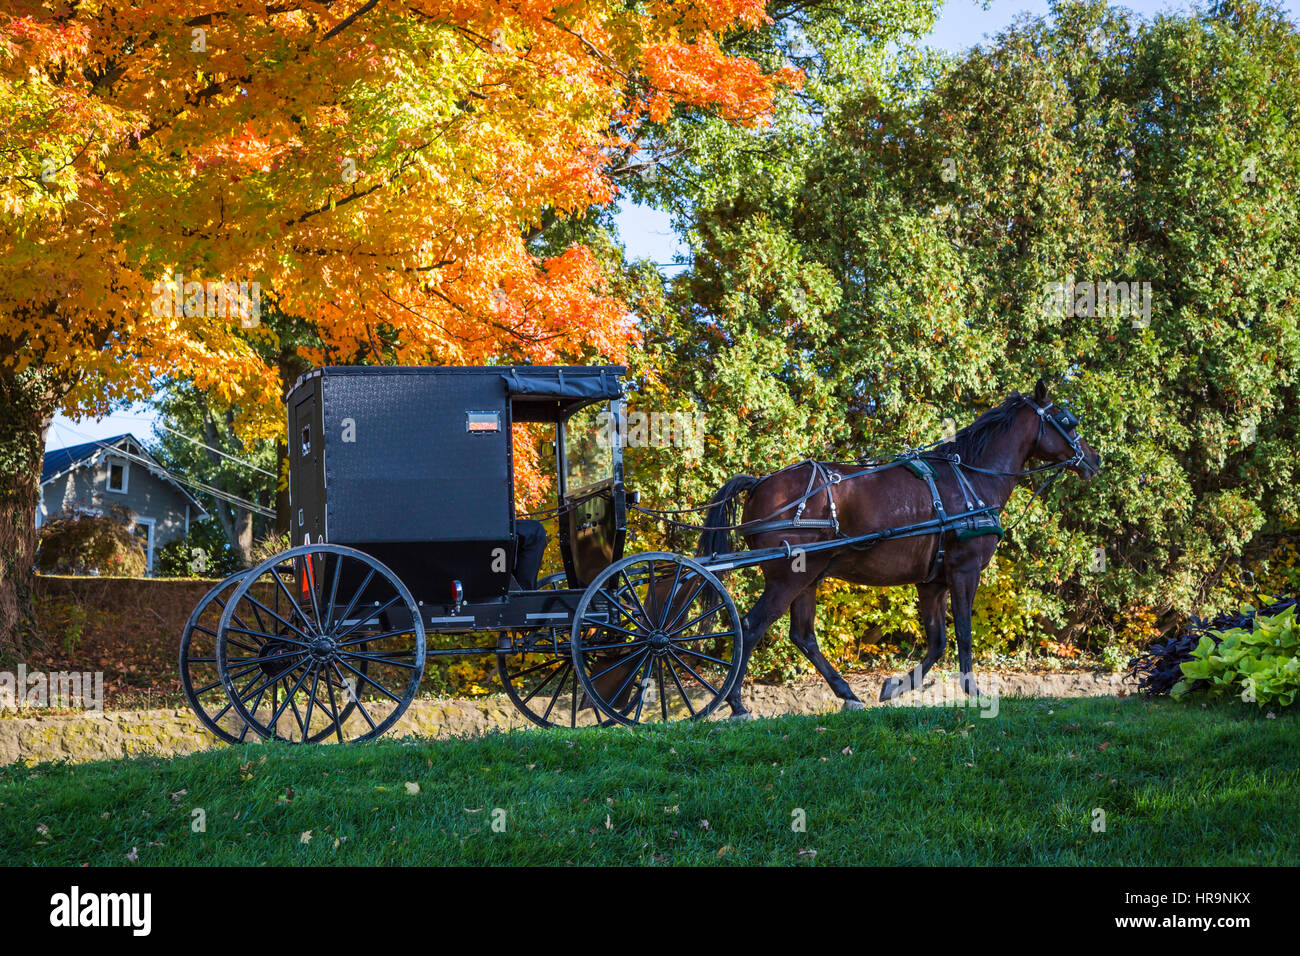 A horse and buggy on a rural road in Amish country with fall foliage color  near Walnut Creek, Ohio, USA. Stock Photo